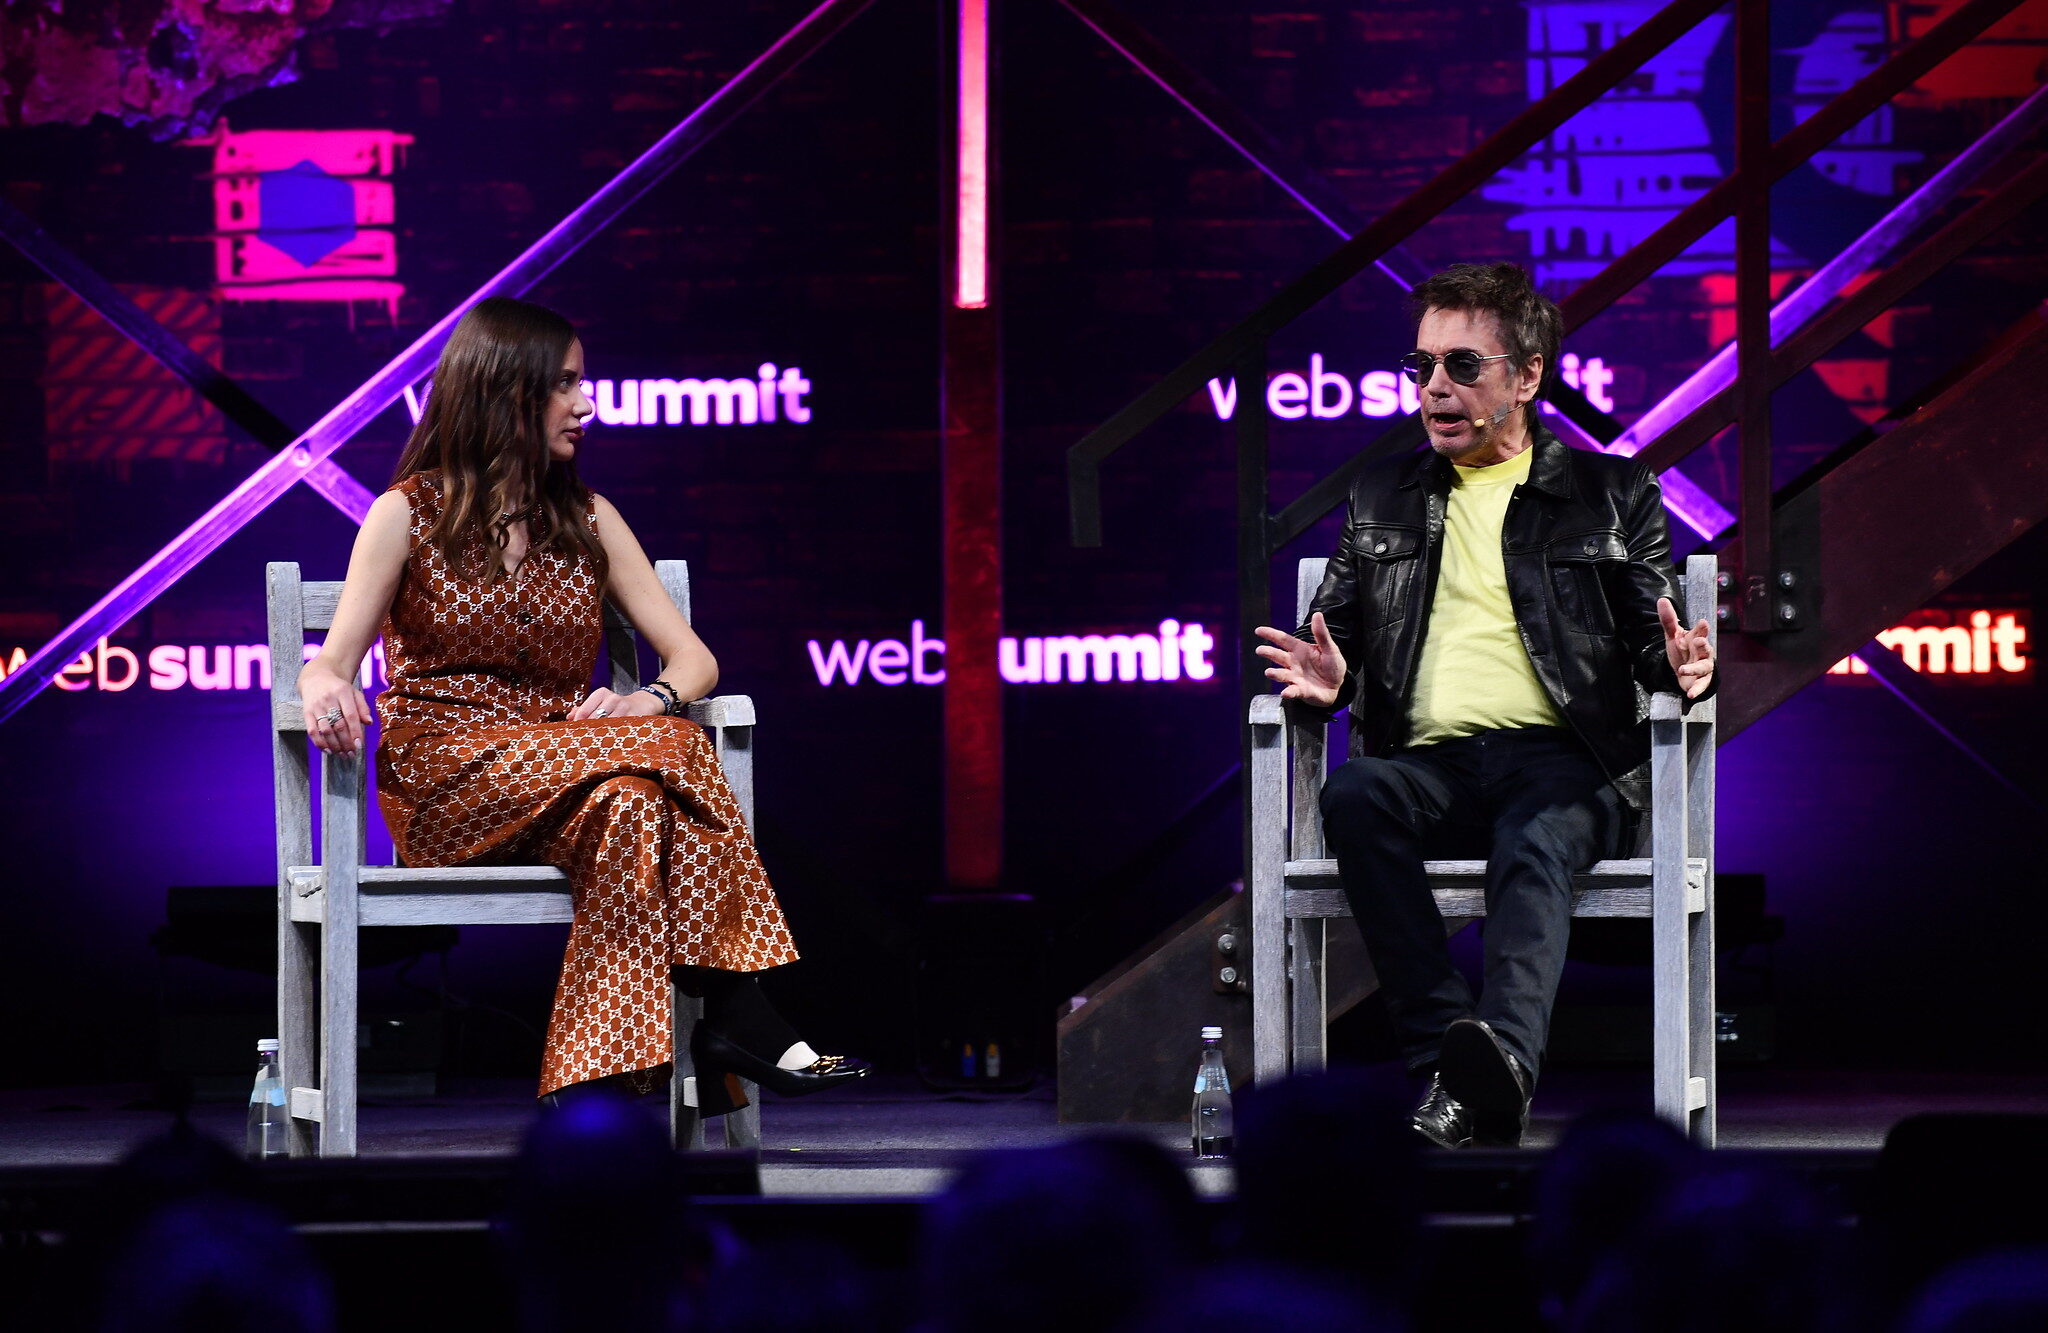 Jean-Michel Jarre, right, and Sasha Tityanko, Sensorium Galaxy, on Contentmakers Stage during day three of Web Summit 2021 at the Altice Arena in Lisbon, Portugal